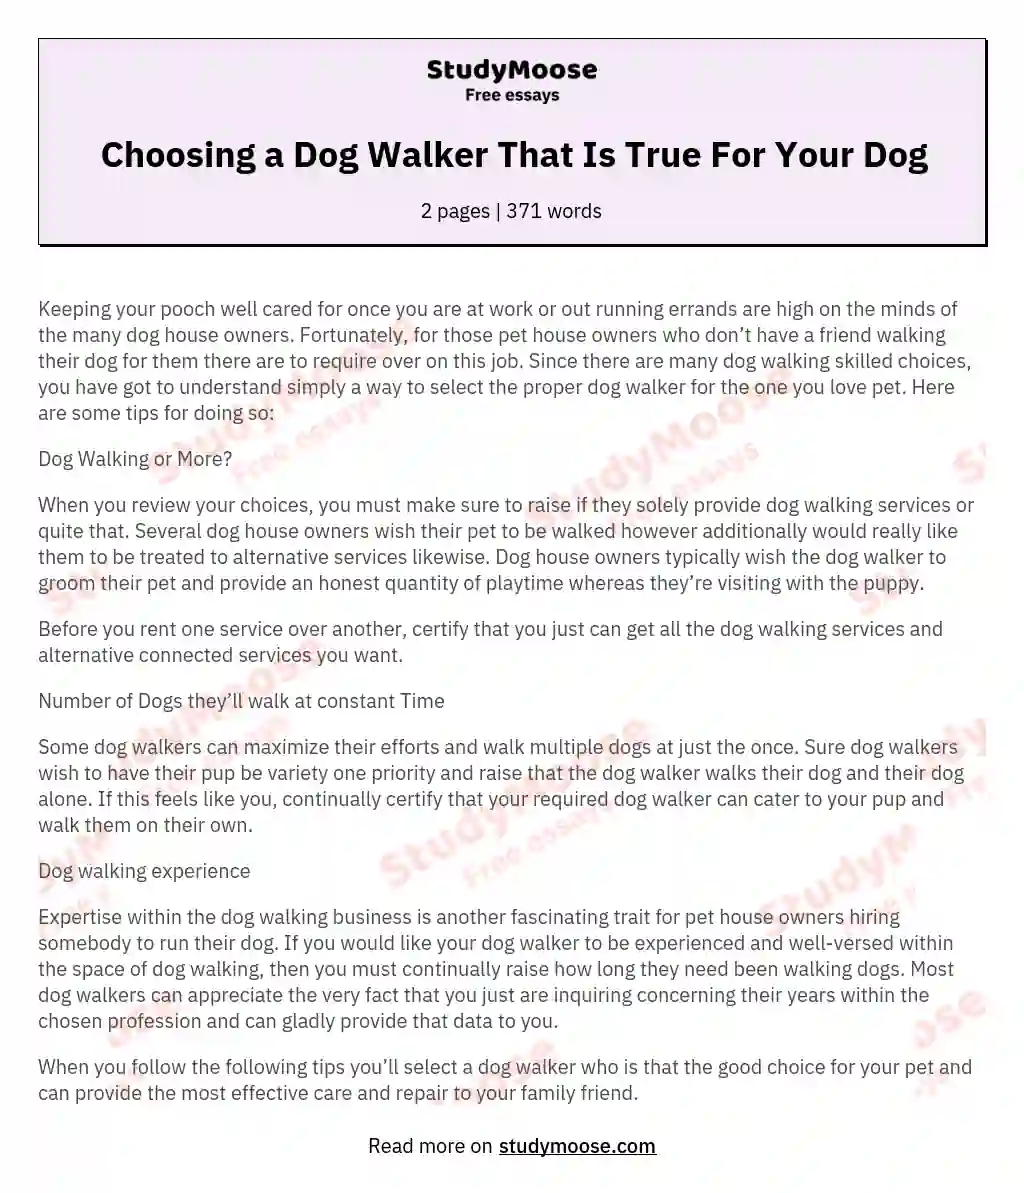 Choosing a Dog Walker That Is True For Your Dog